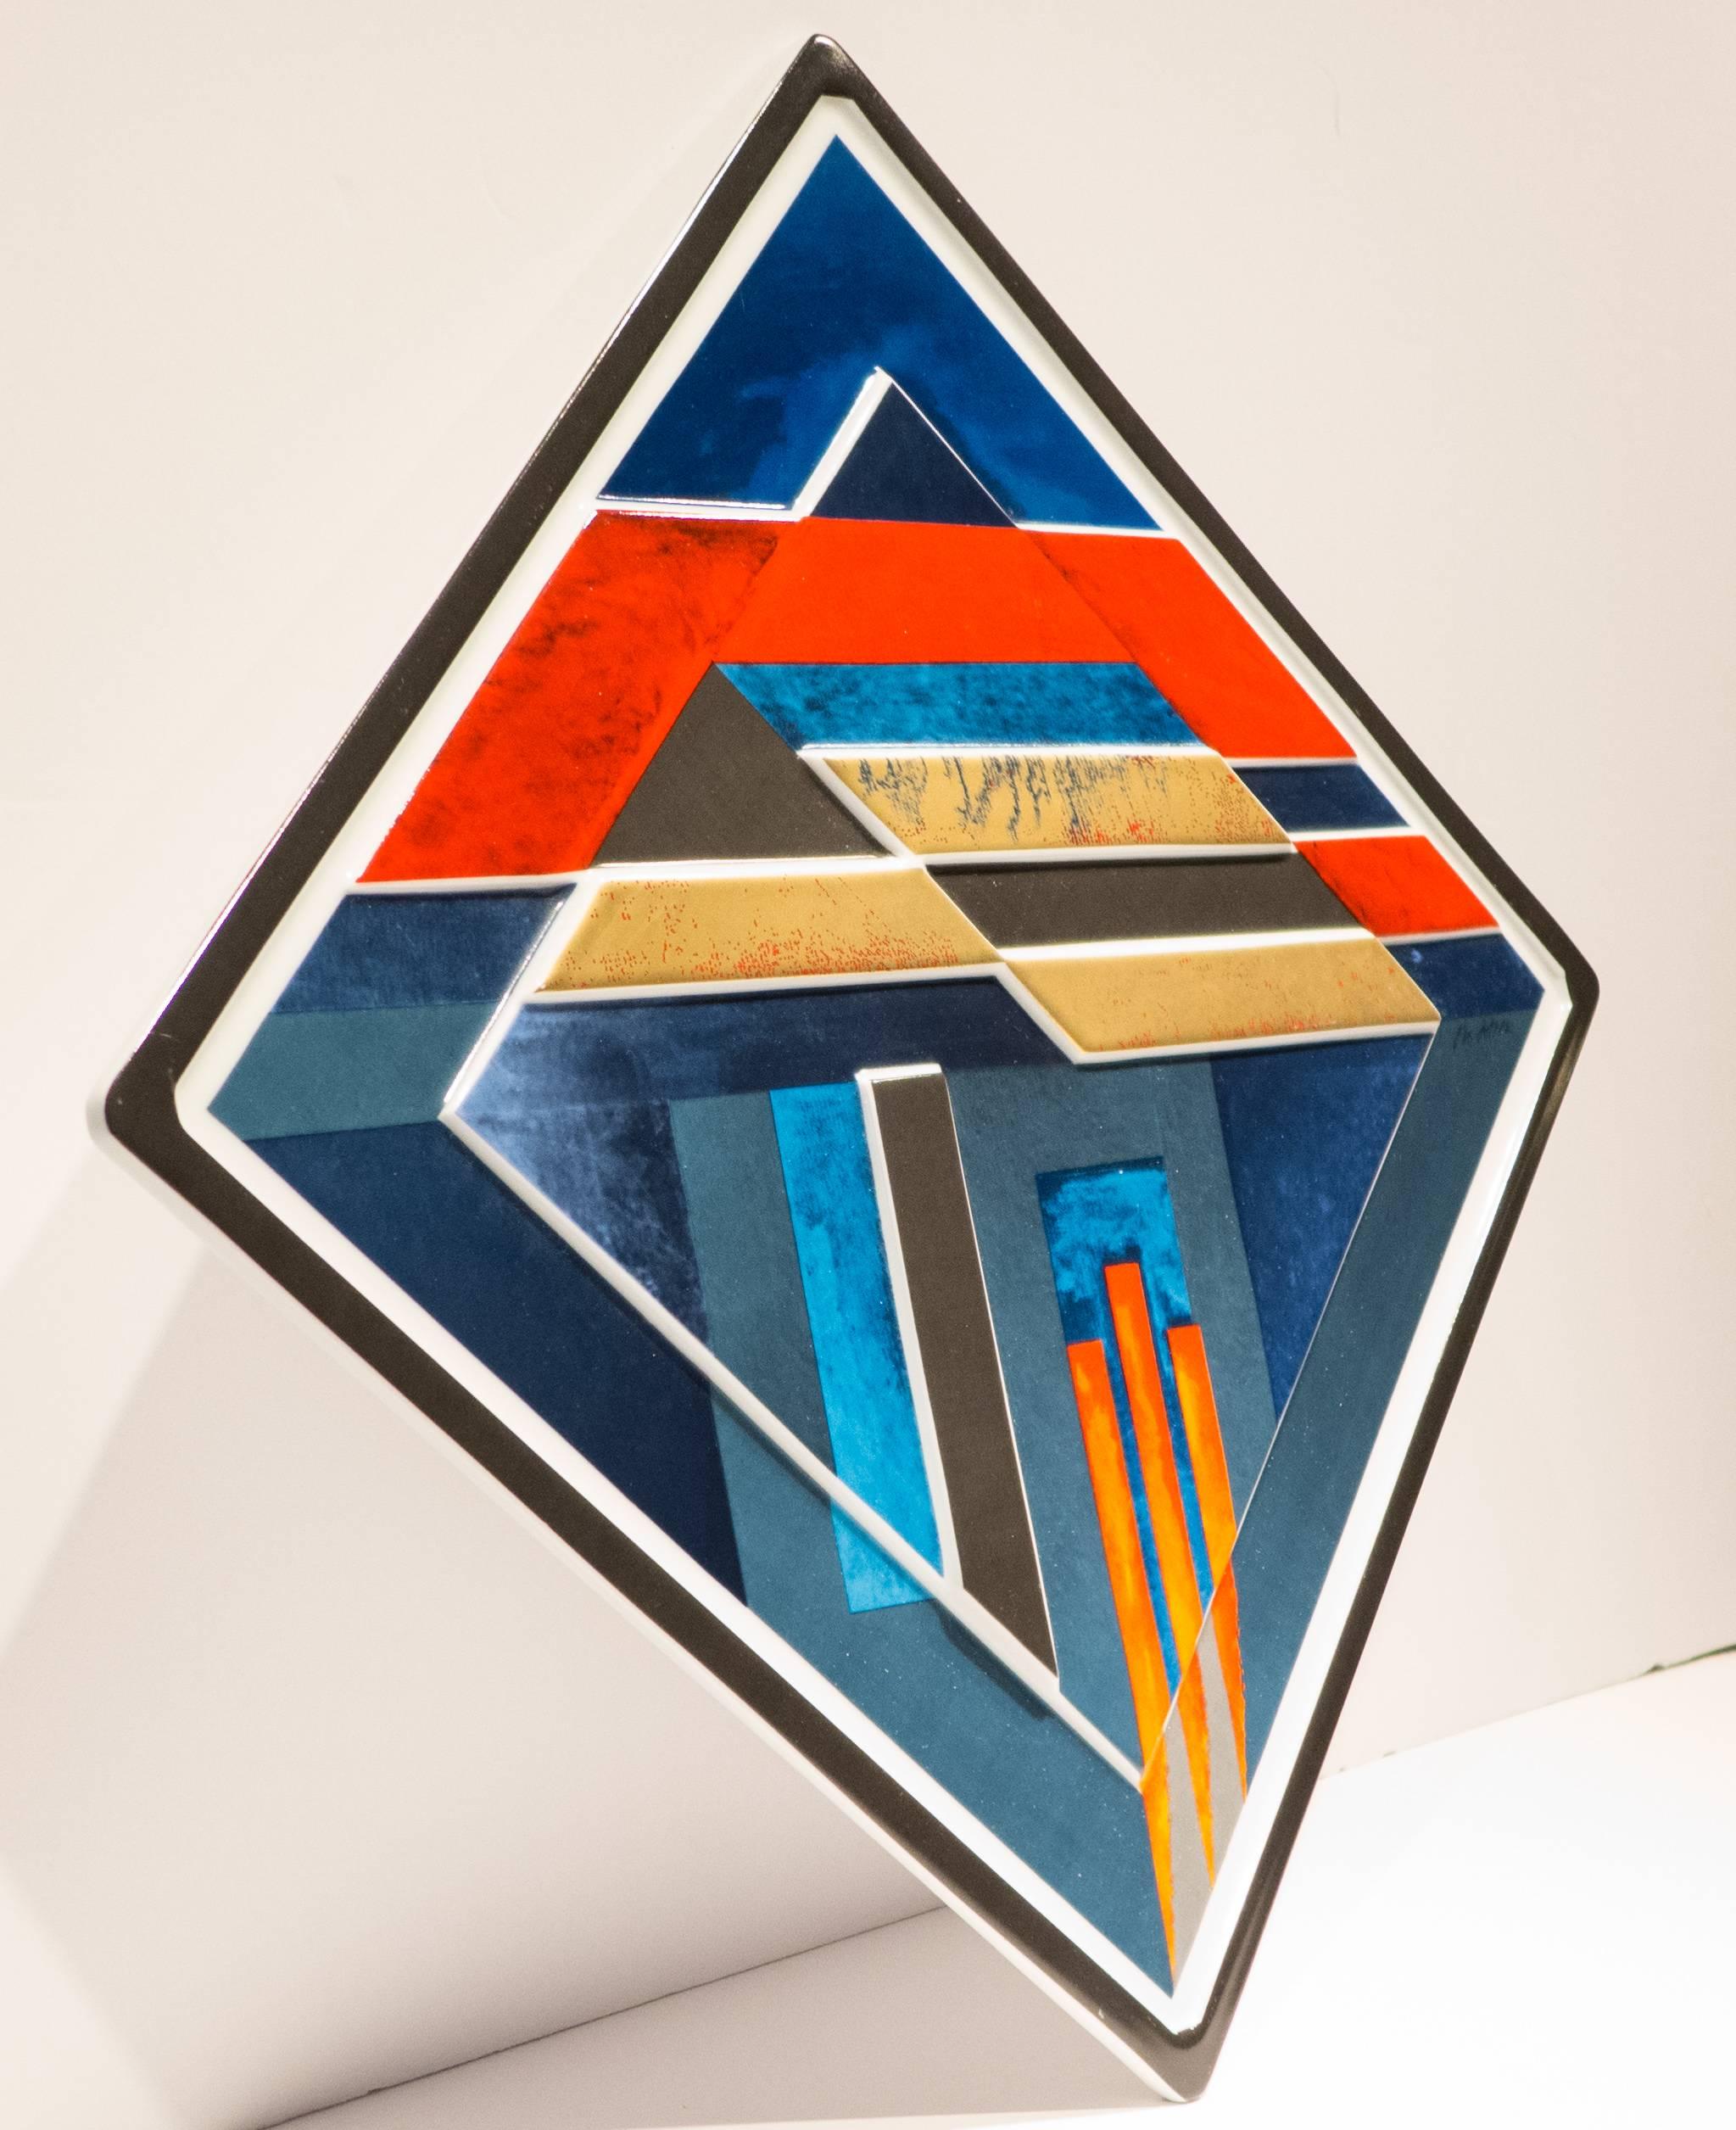 Porcelain plaque for the Jahresteller series, by German abstract painter, sculptor, and graphic artist Otto Herbert Hajek. Produced by Rosenthal Studio Line in 1980 in a limited edition of 3,000 of which this is number 1918. The Jahresteller series